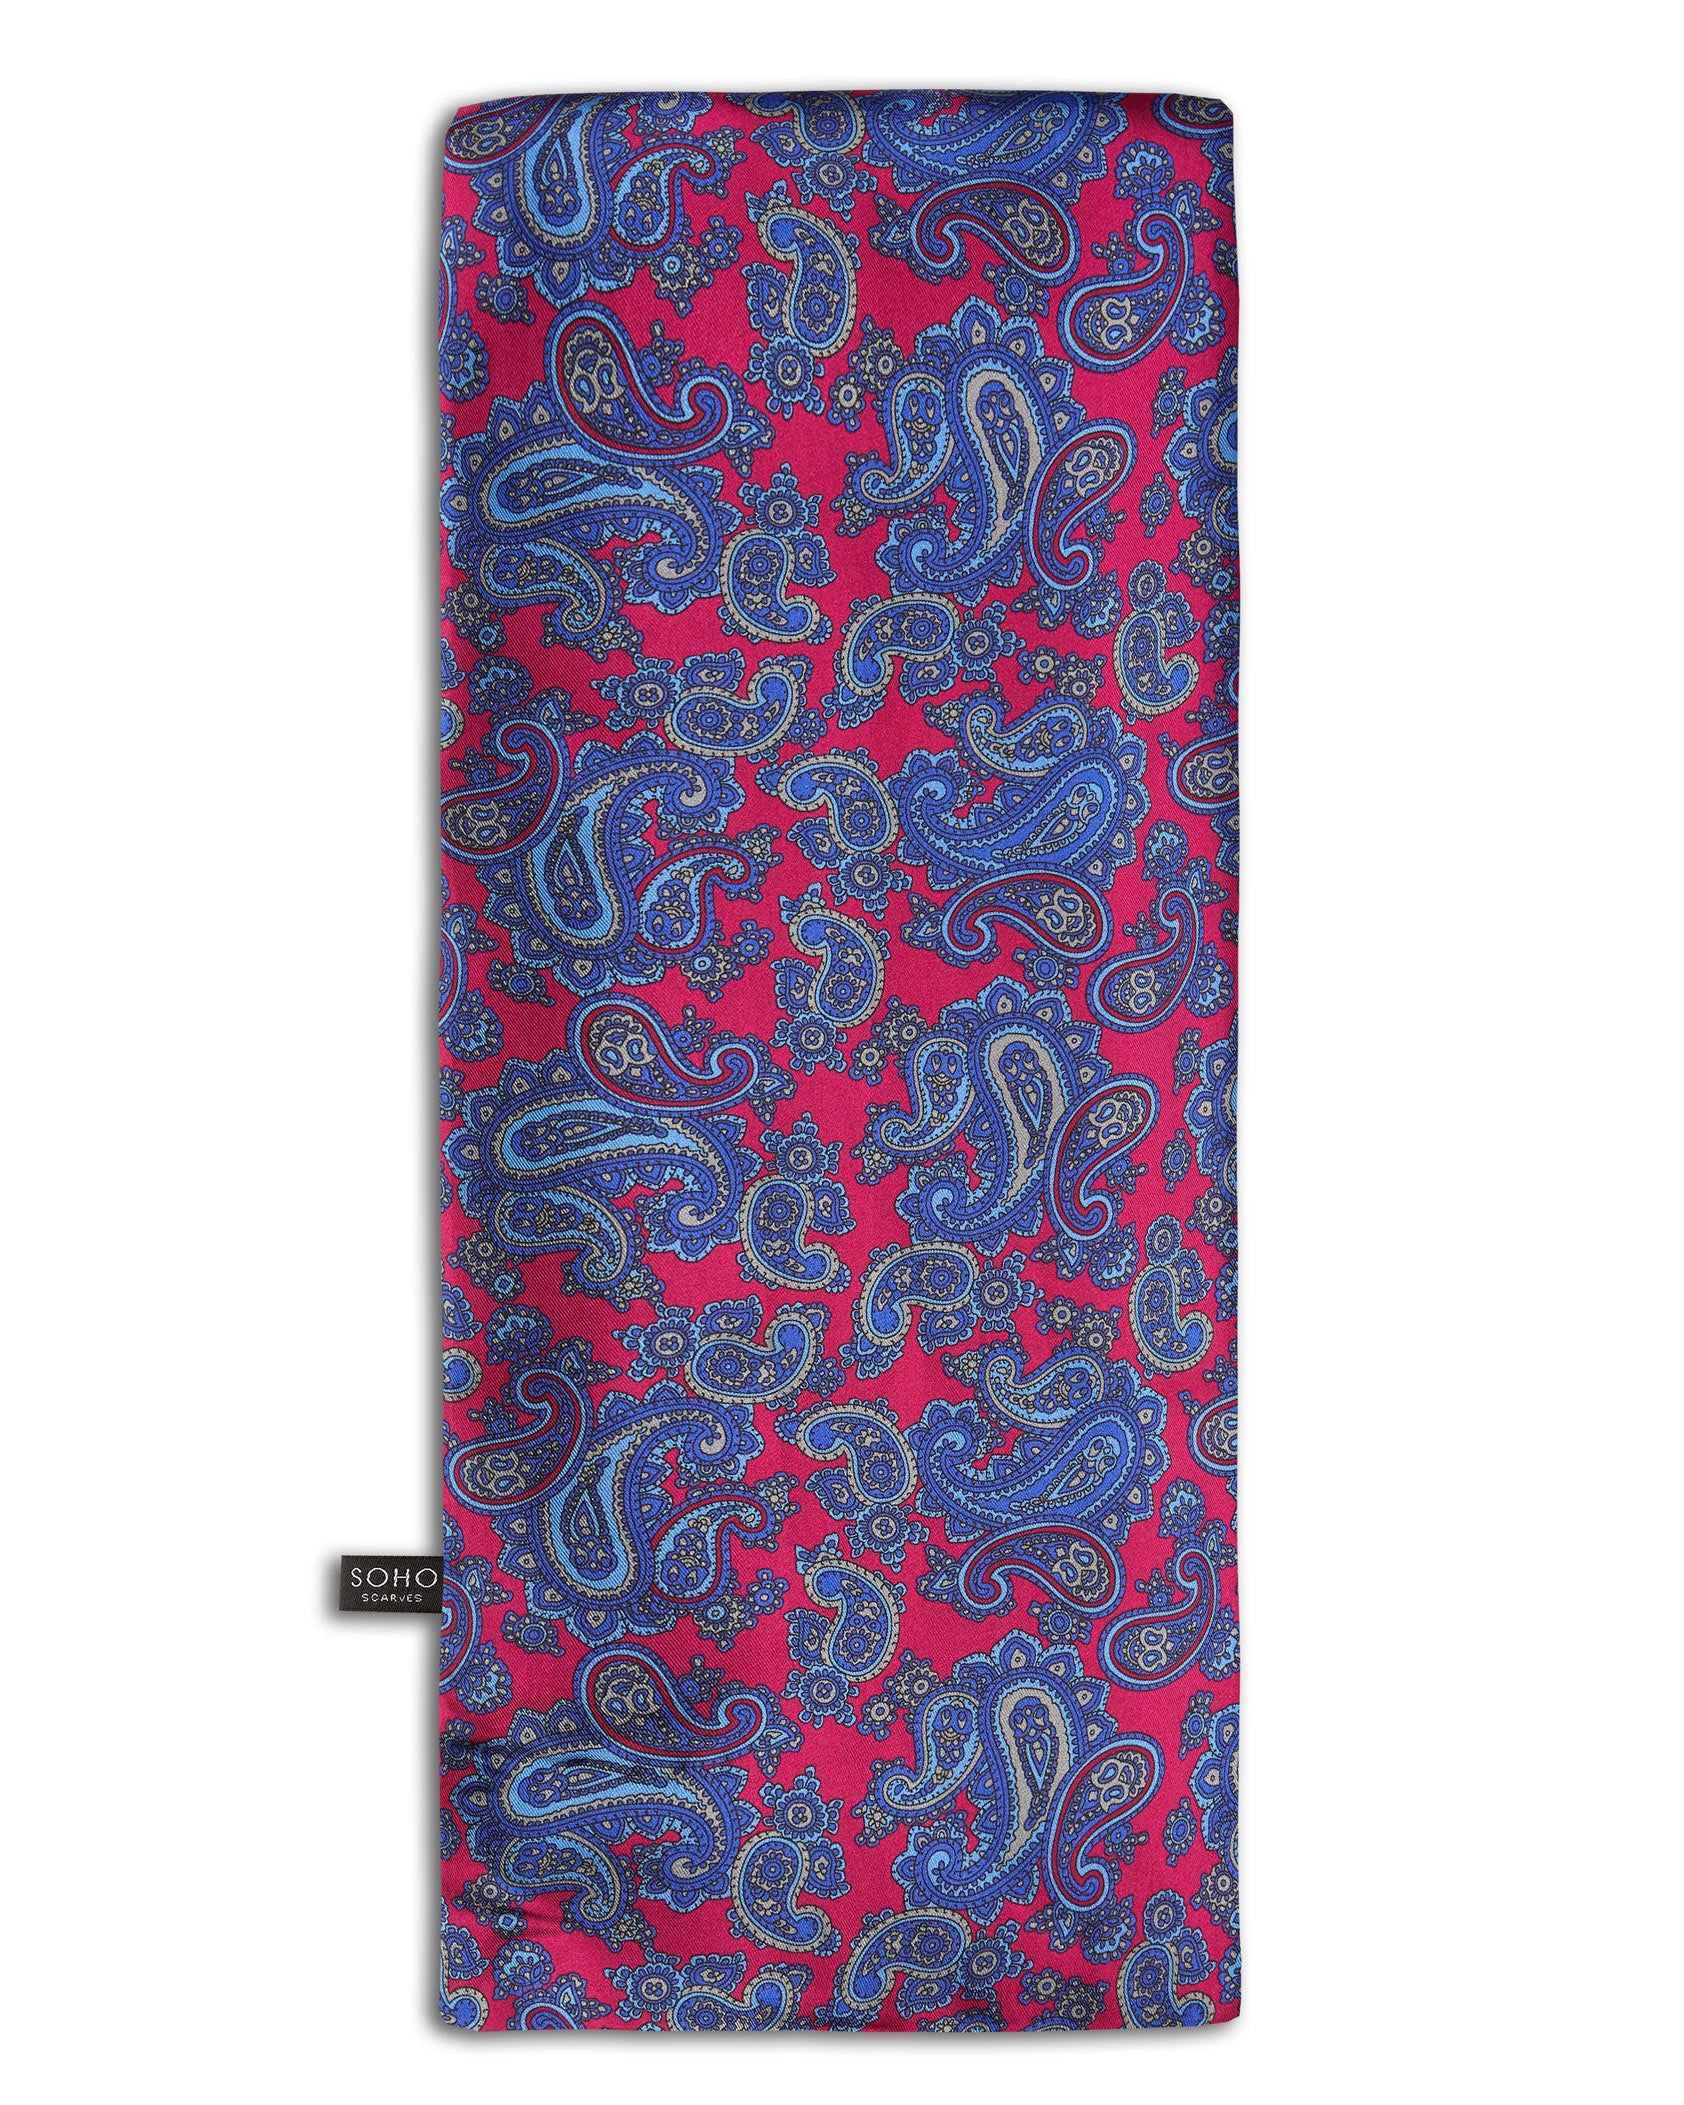 'The Kita' paisley patterned silk scarf arranged in a rectangular shape, clearly showing the fuchsia fabric with blue-violet paisley patterns and the 'Soho Scarves' branding label on the bottom left edge.